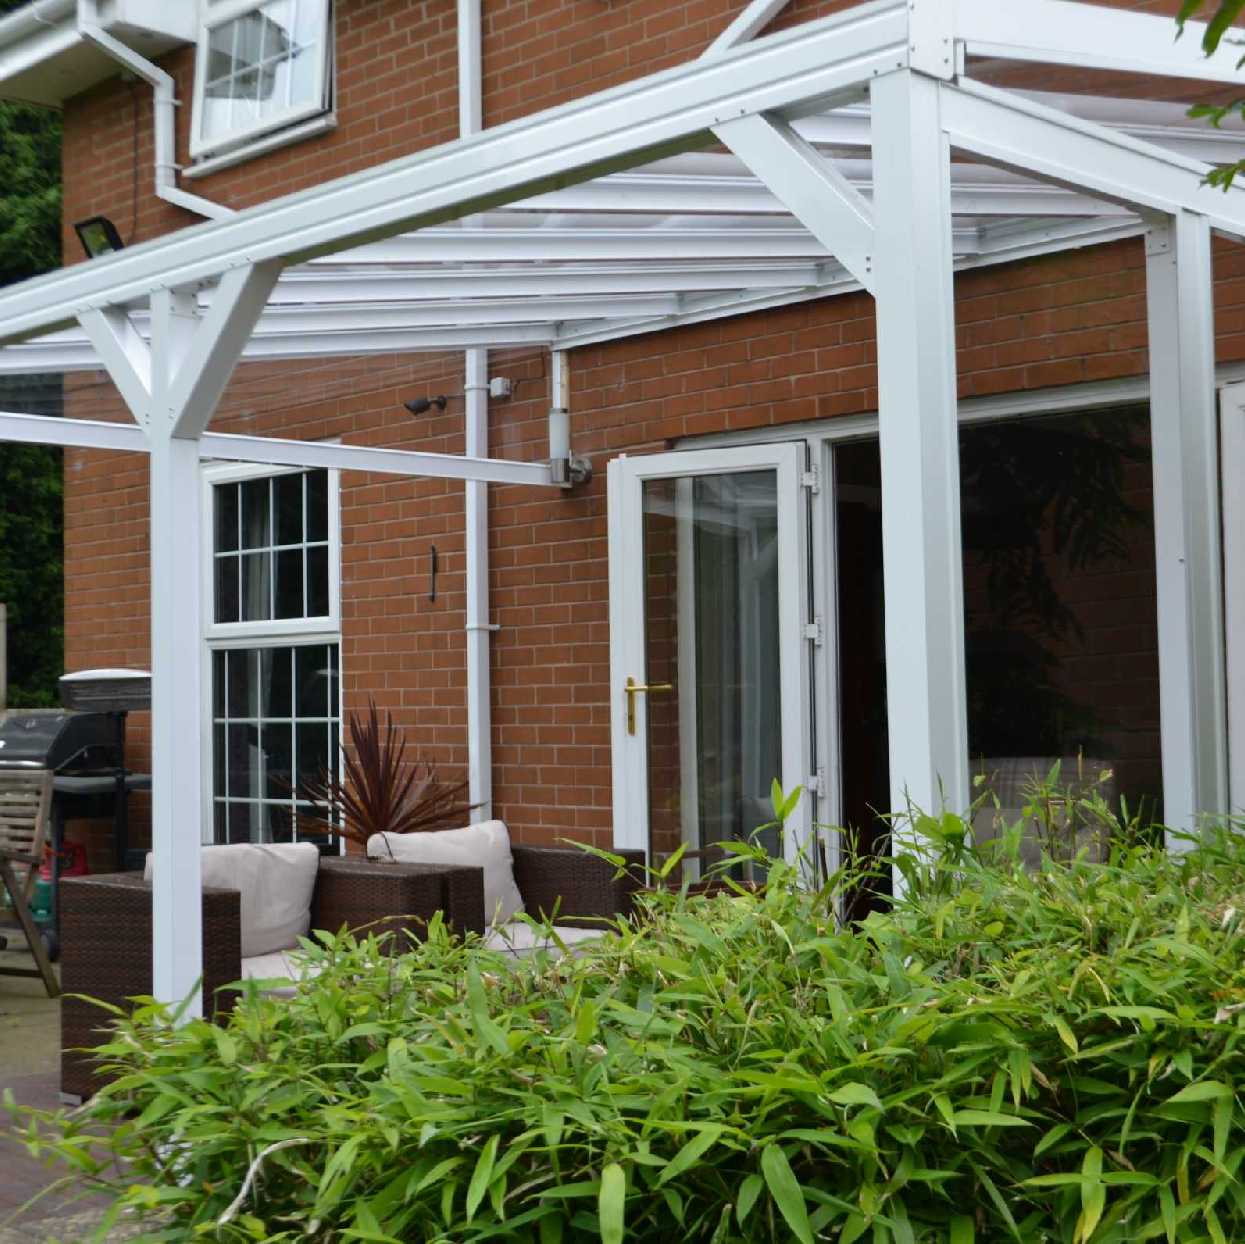 Omega Smart Lean-To Canopy, White UNGLAZED for 6mm Glazing - 2.1m (W) x 1.5m (P), (2) Supporting Posts from Omega Build